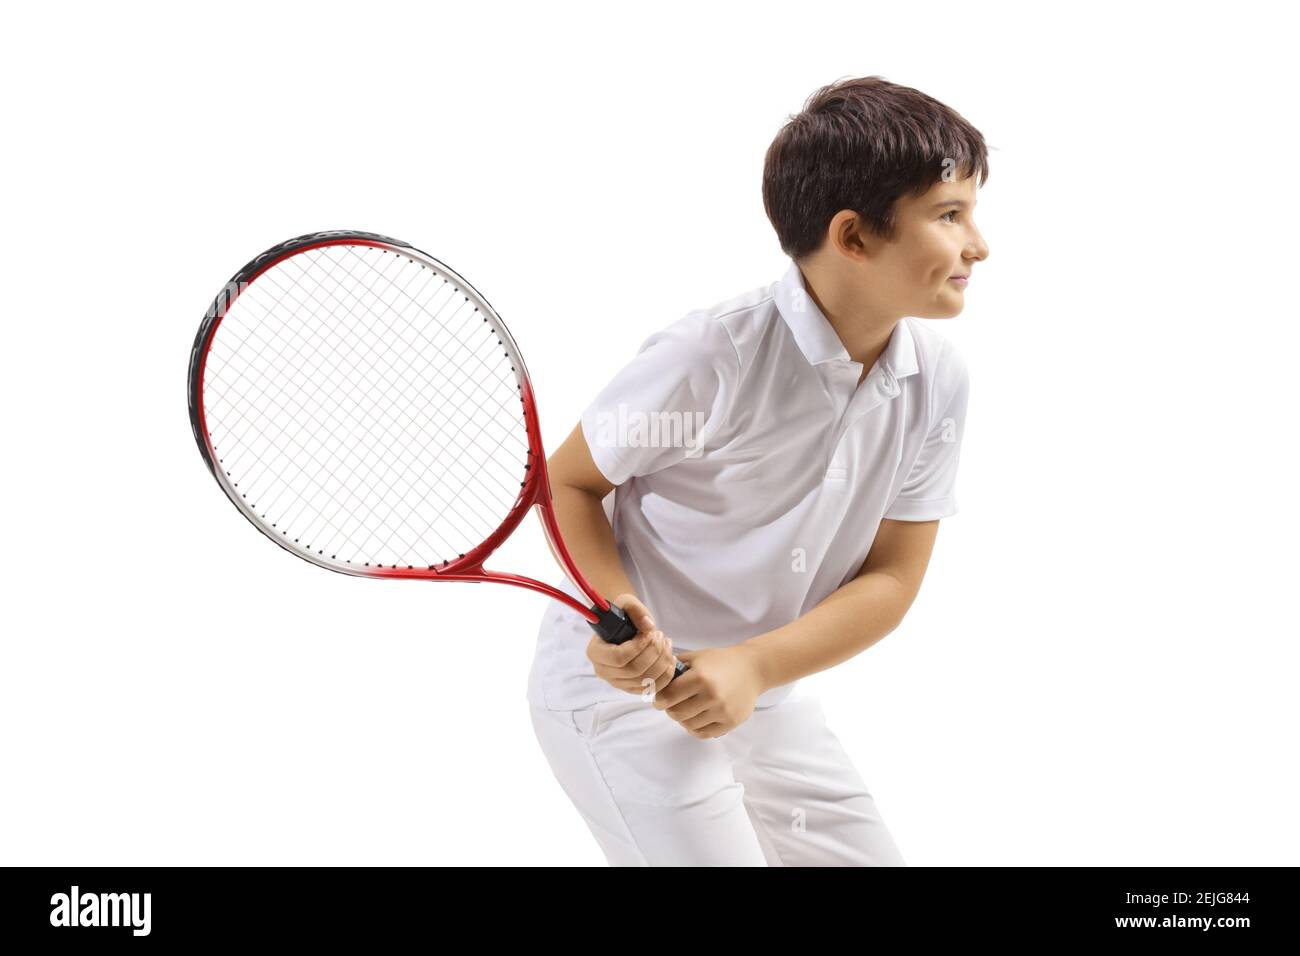 Kid playing tennis isolated on white background Stock Photo